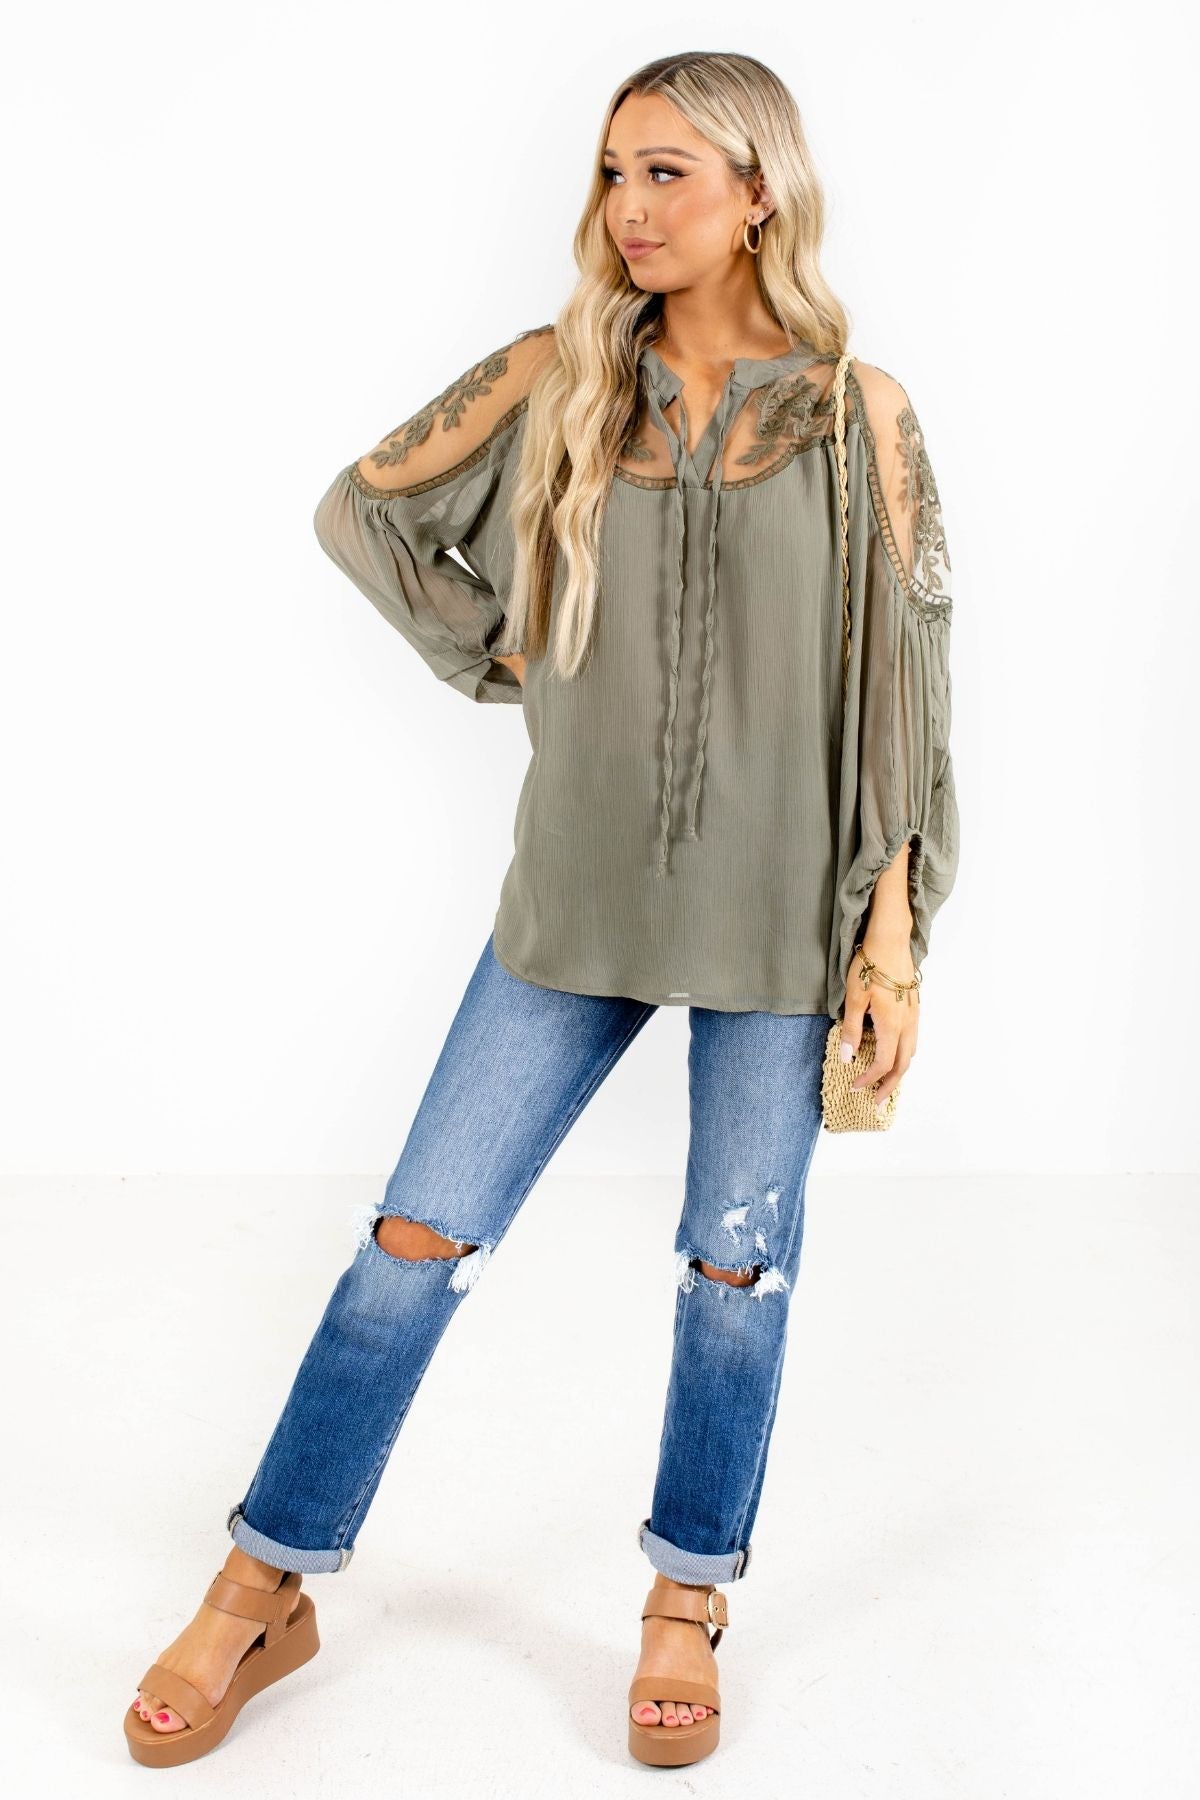 Olive Green Top outfit from Bella Ella Boutique.